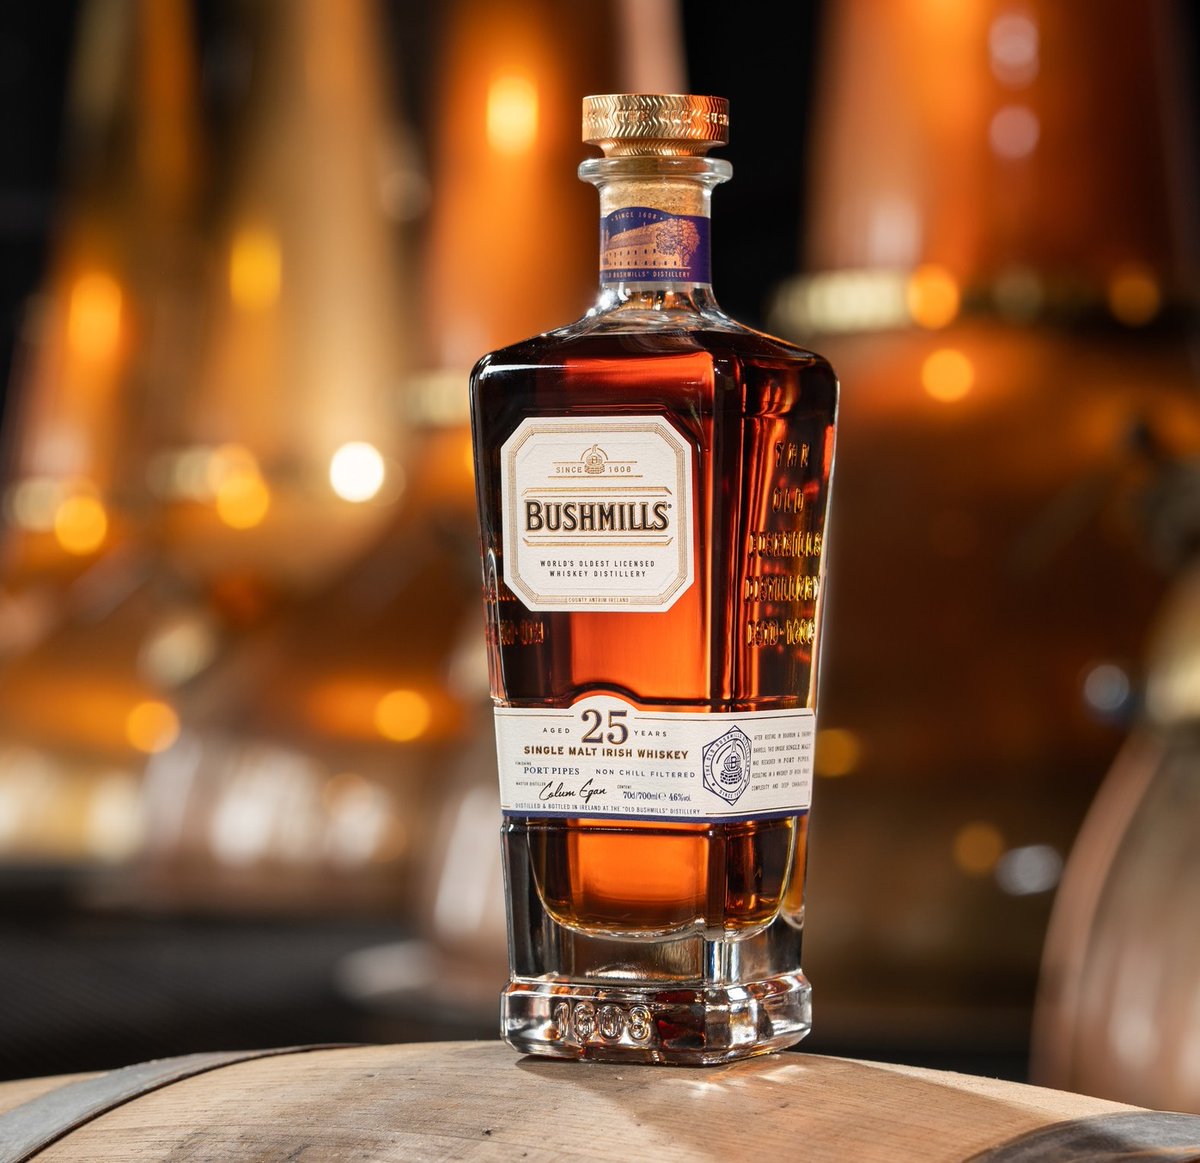 2 bottles of the legendary Bushmills Irish Whiskey 25 Year Old Single Malt have landed in-store today! Available to order online with free nationwide delivery from bit.ly/Bushmills25YOS… #Bushmills #SingleMalt #IrishWhiskey #bushmills25